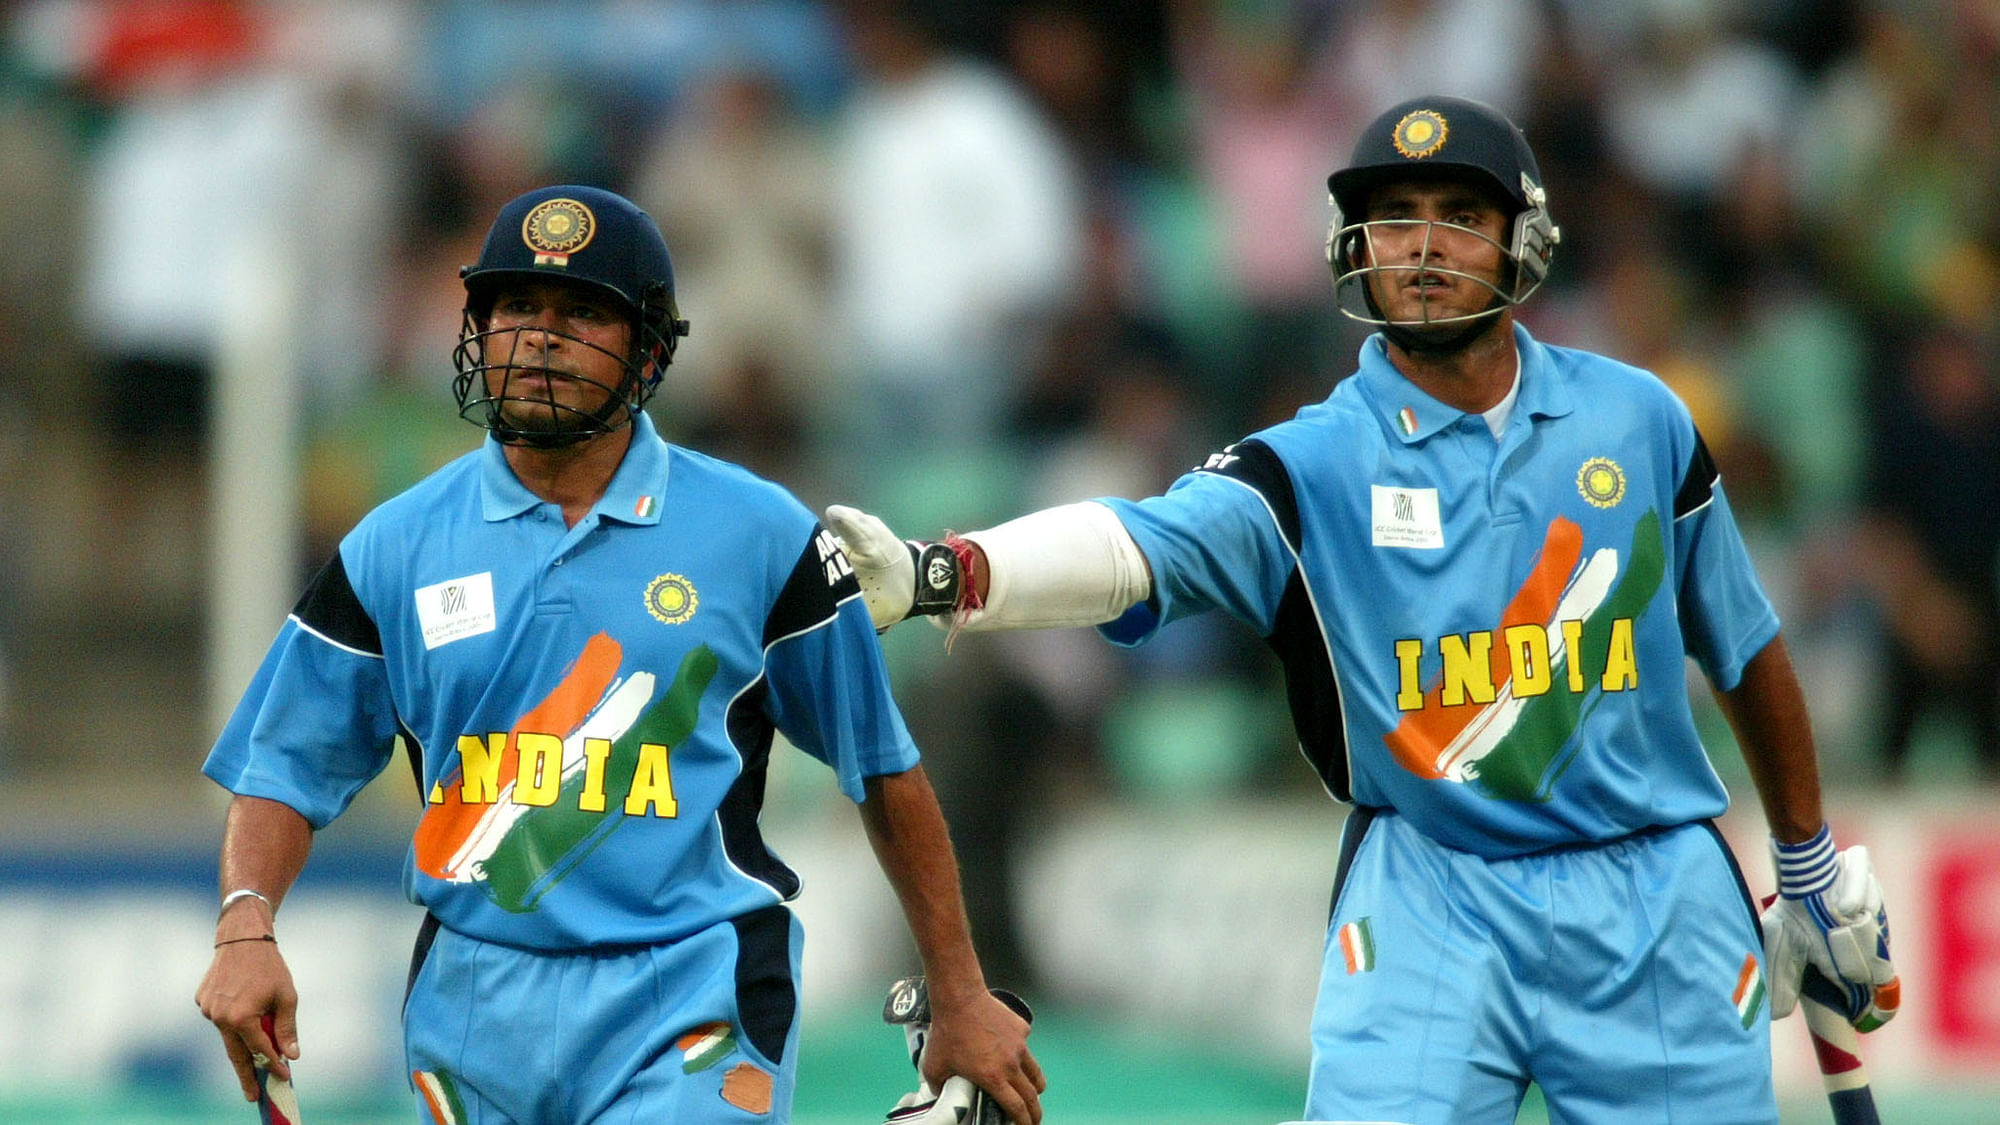 Former captain Sourav Ganguly has clarified that his response about wanting India to win the World Cup, had nothing to do with teammate Sachin Tendulkar's.